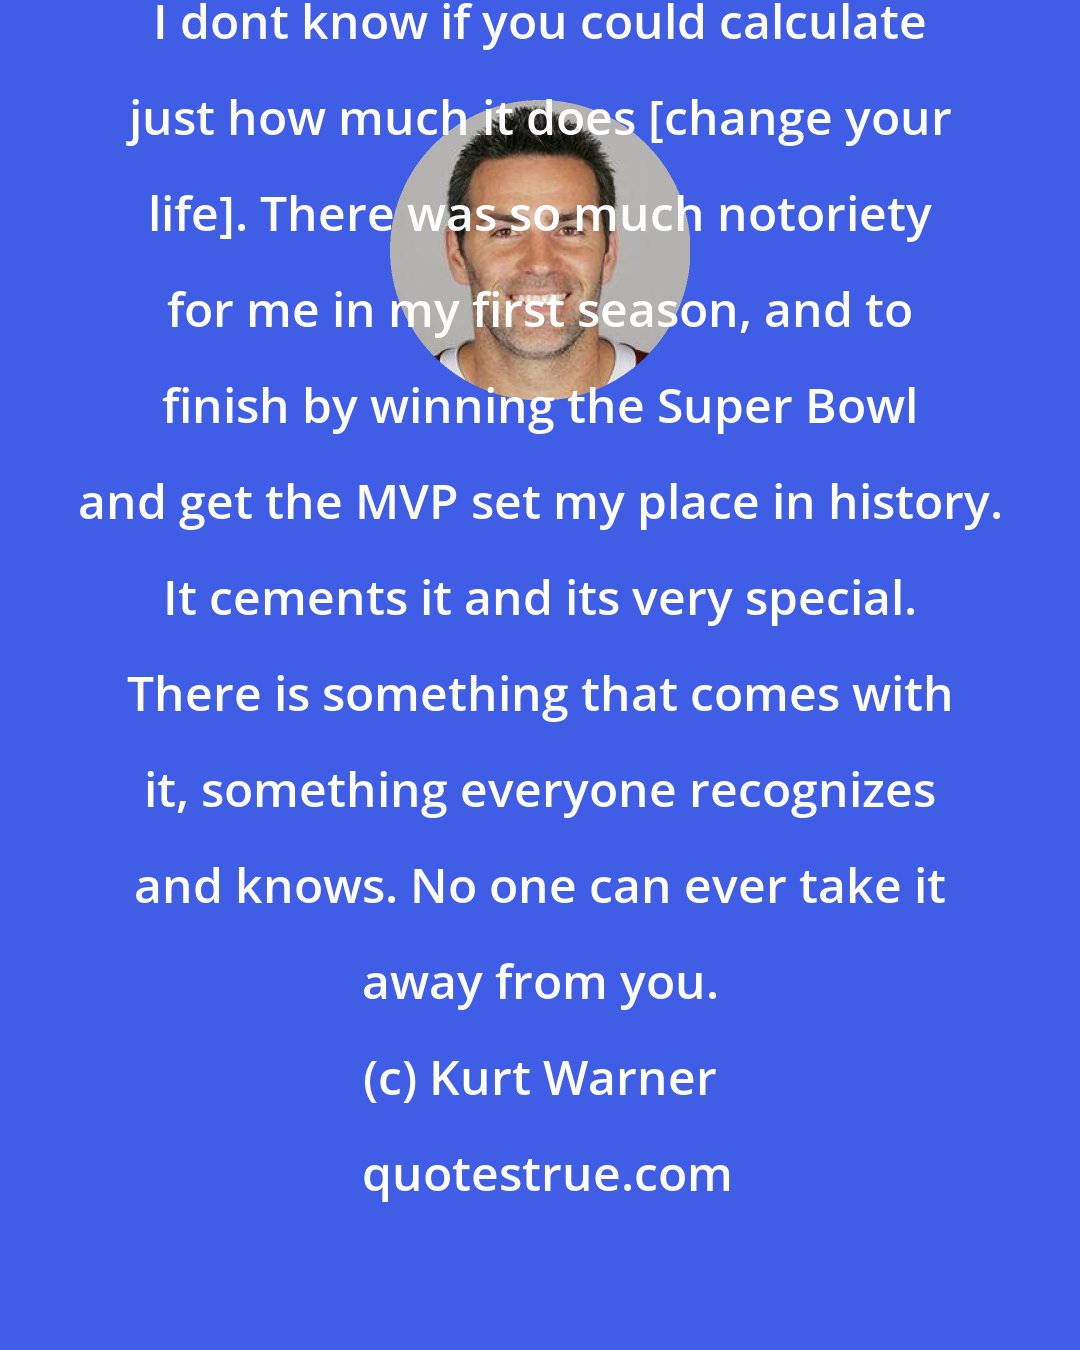 Kurt Warner: It changed my life in an extreme way. I dont know if you could calculate just how much it does [change your life]. There was so much notoriety for me in my first season, and to finish by winning the Super Bowl and get the MVP set my place in history. It cements it and its very special. There is something that comes with it, something everyone recognizes and knows. No one can ever take it away from you.